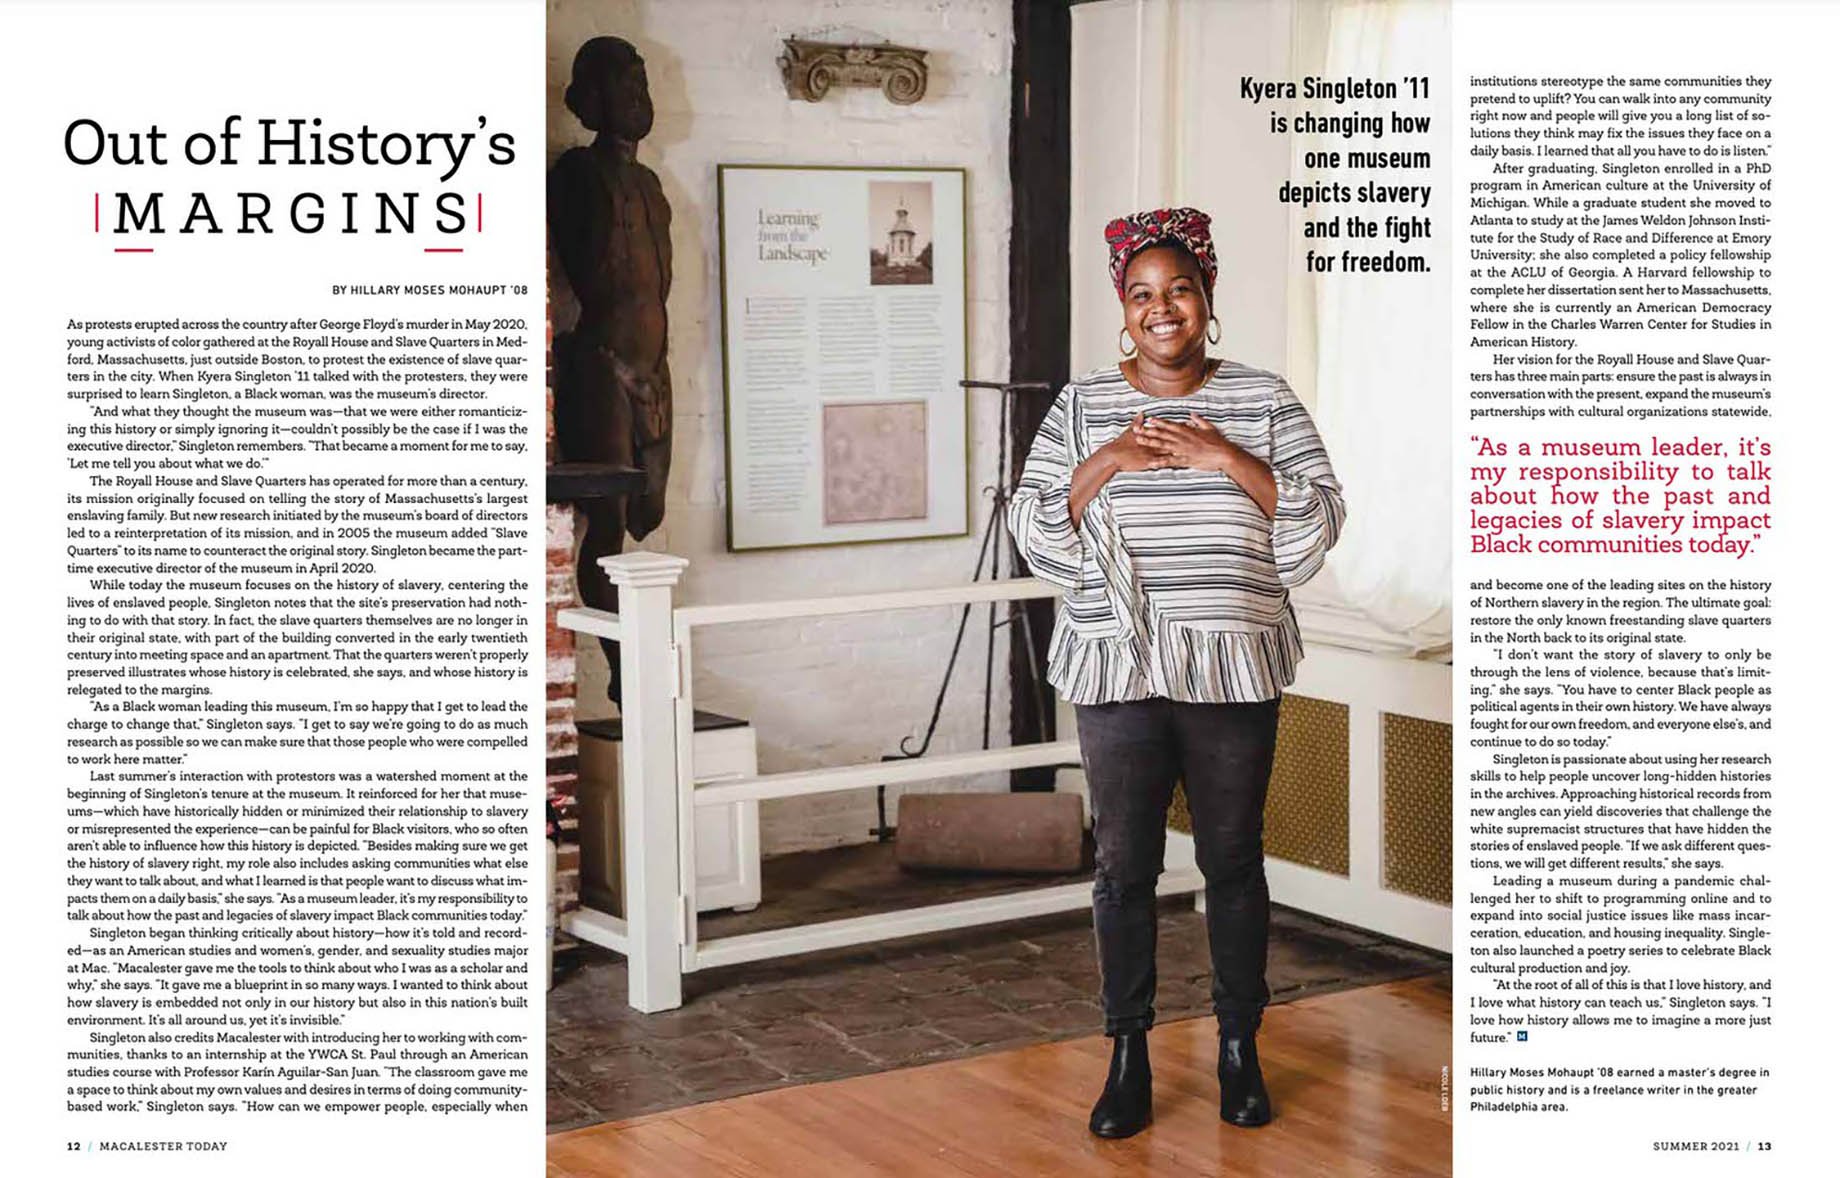 Tear sheet from Macalester College's digital publication Macalestor Today featuring Kyera Singleton shot by Nicole Loeb